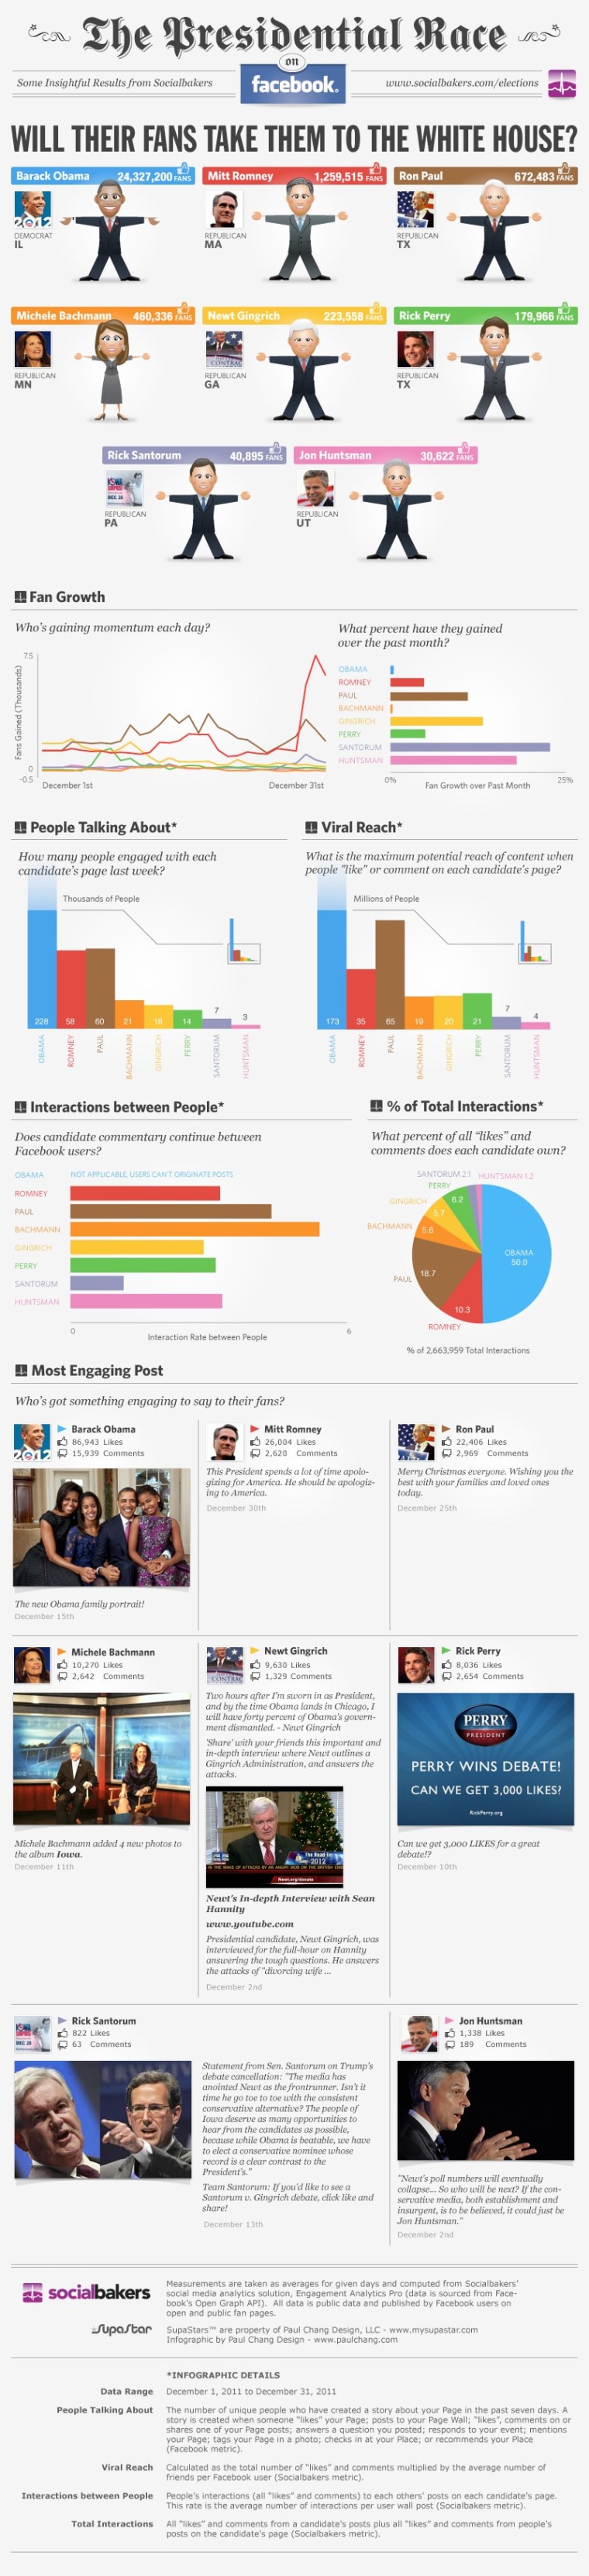 Socialbakers infographic of presidential candidates on Facebook